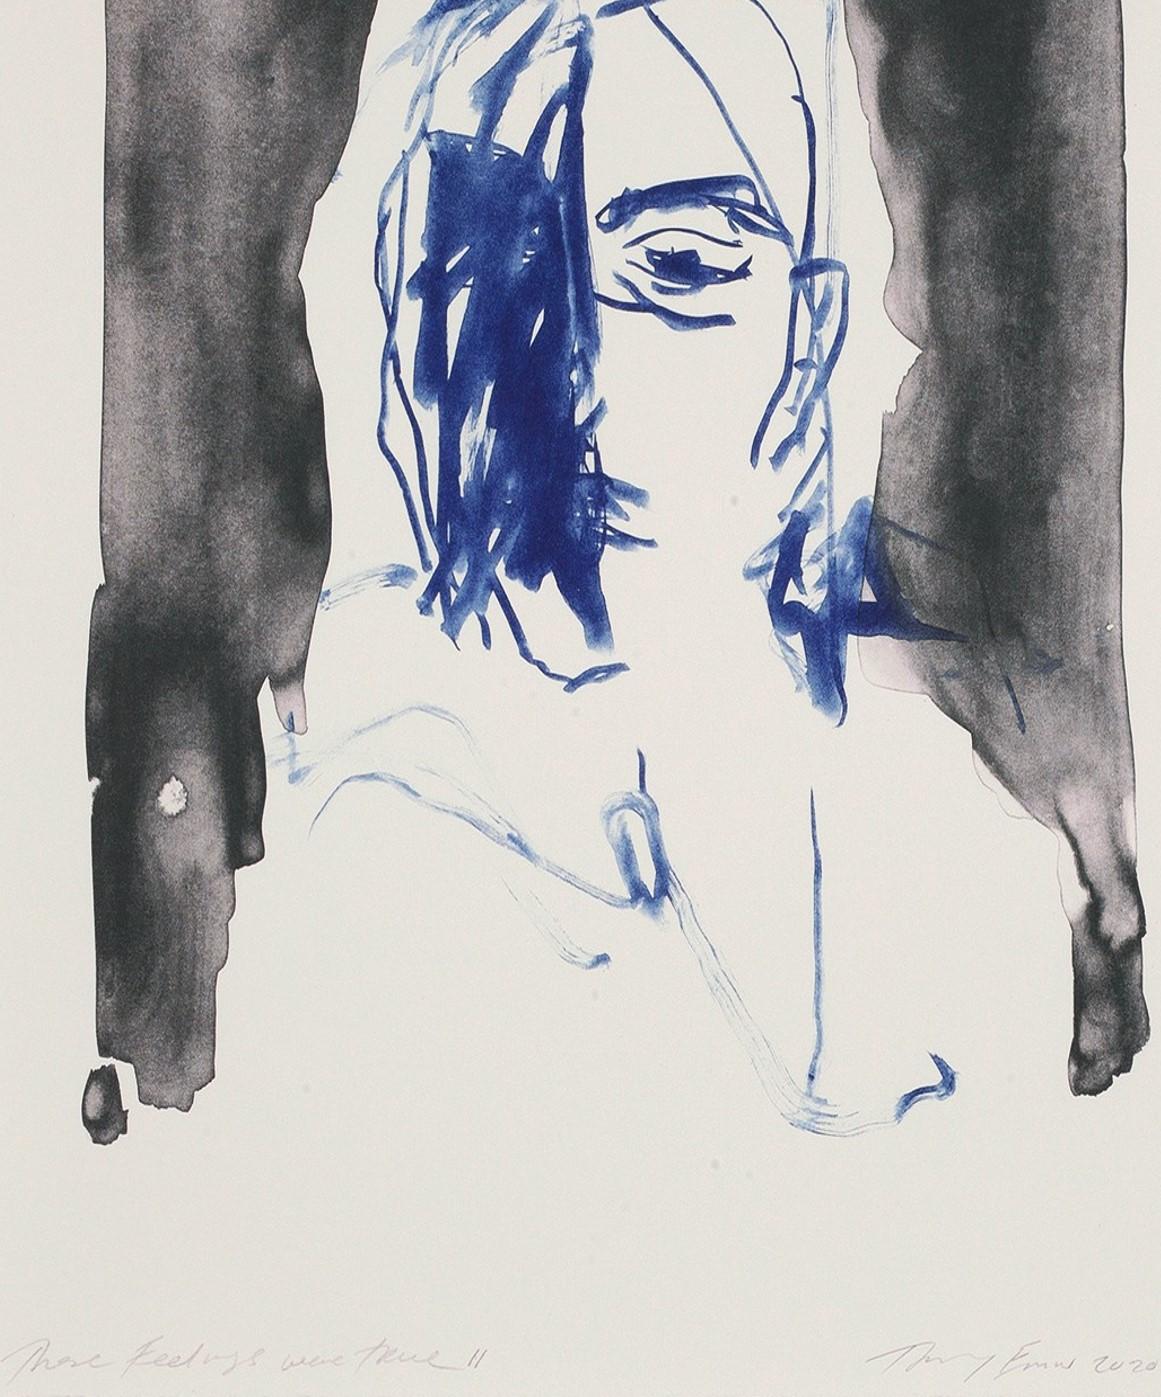 These Feelings Were True II - Emin, Contemporary, YBAs, Lithograph, Portrait - Young British Artists (YBA) Print by Tracey Emin